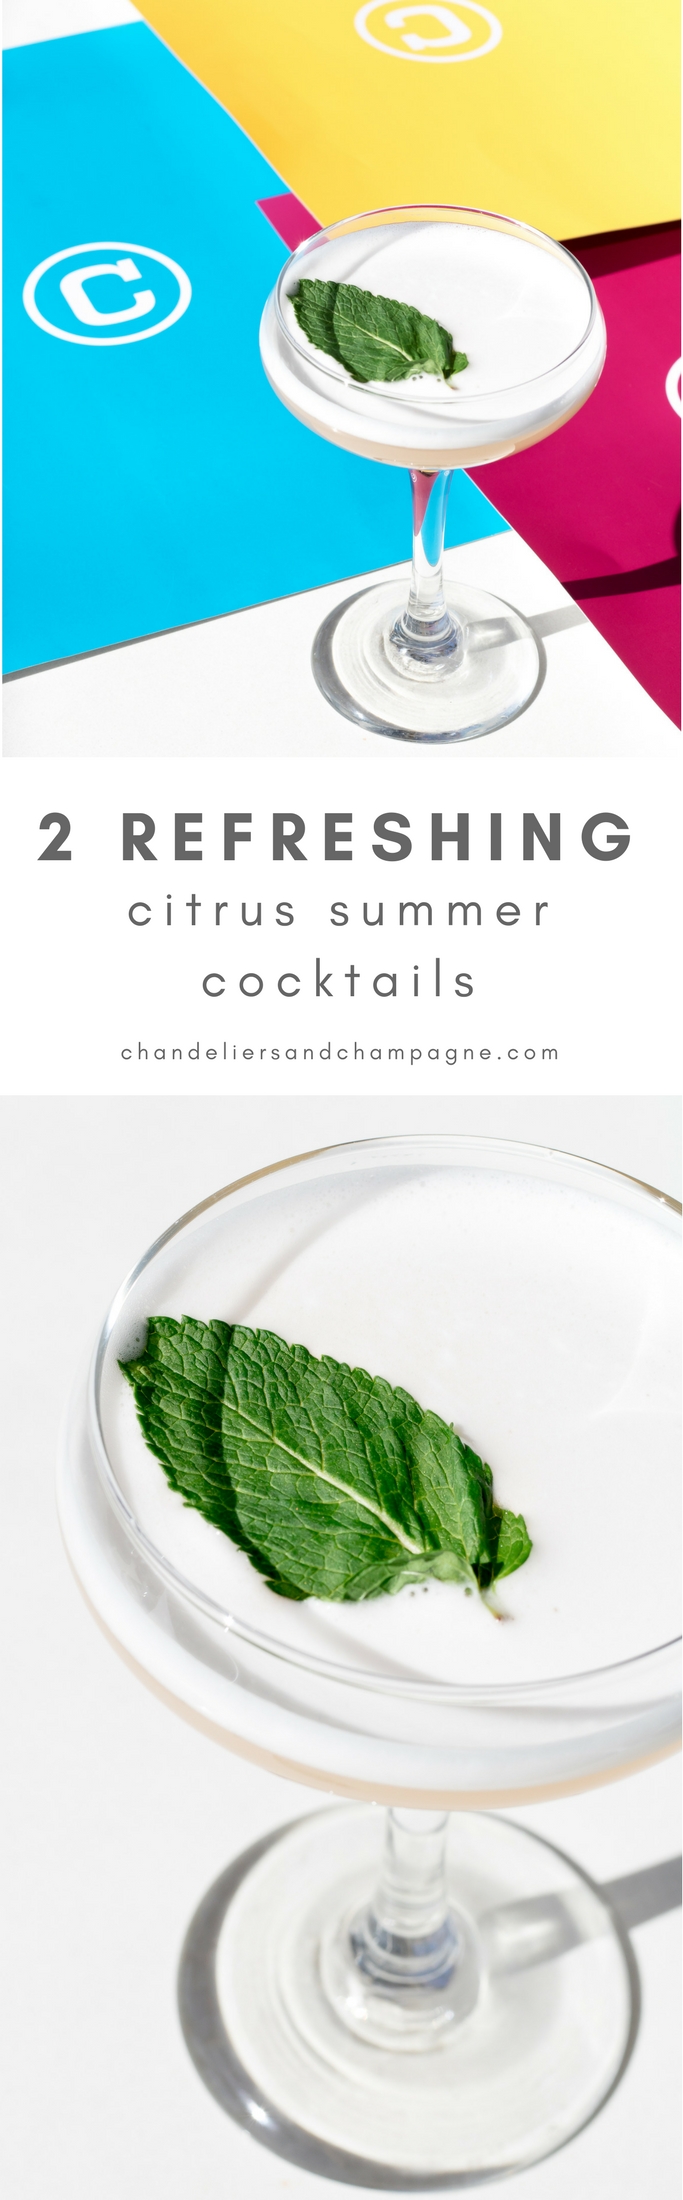 2 refreshing citrus summer cocktails - delicious patio drinks - summer cocktails with tequila, lime and mint 